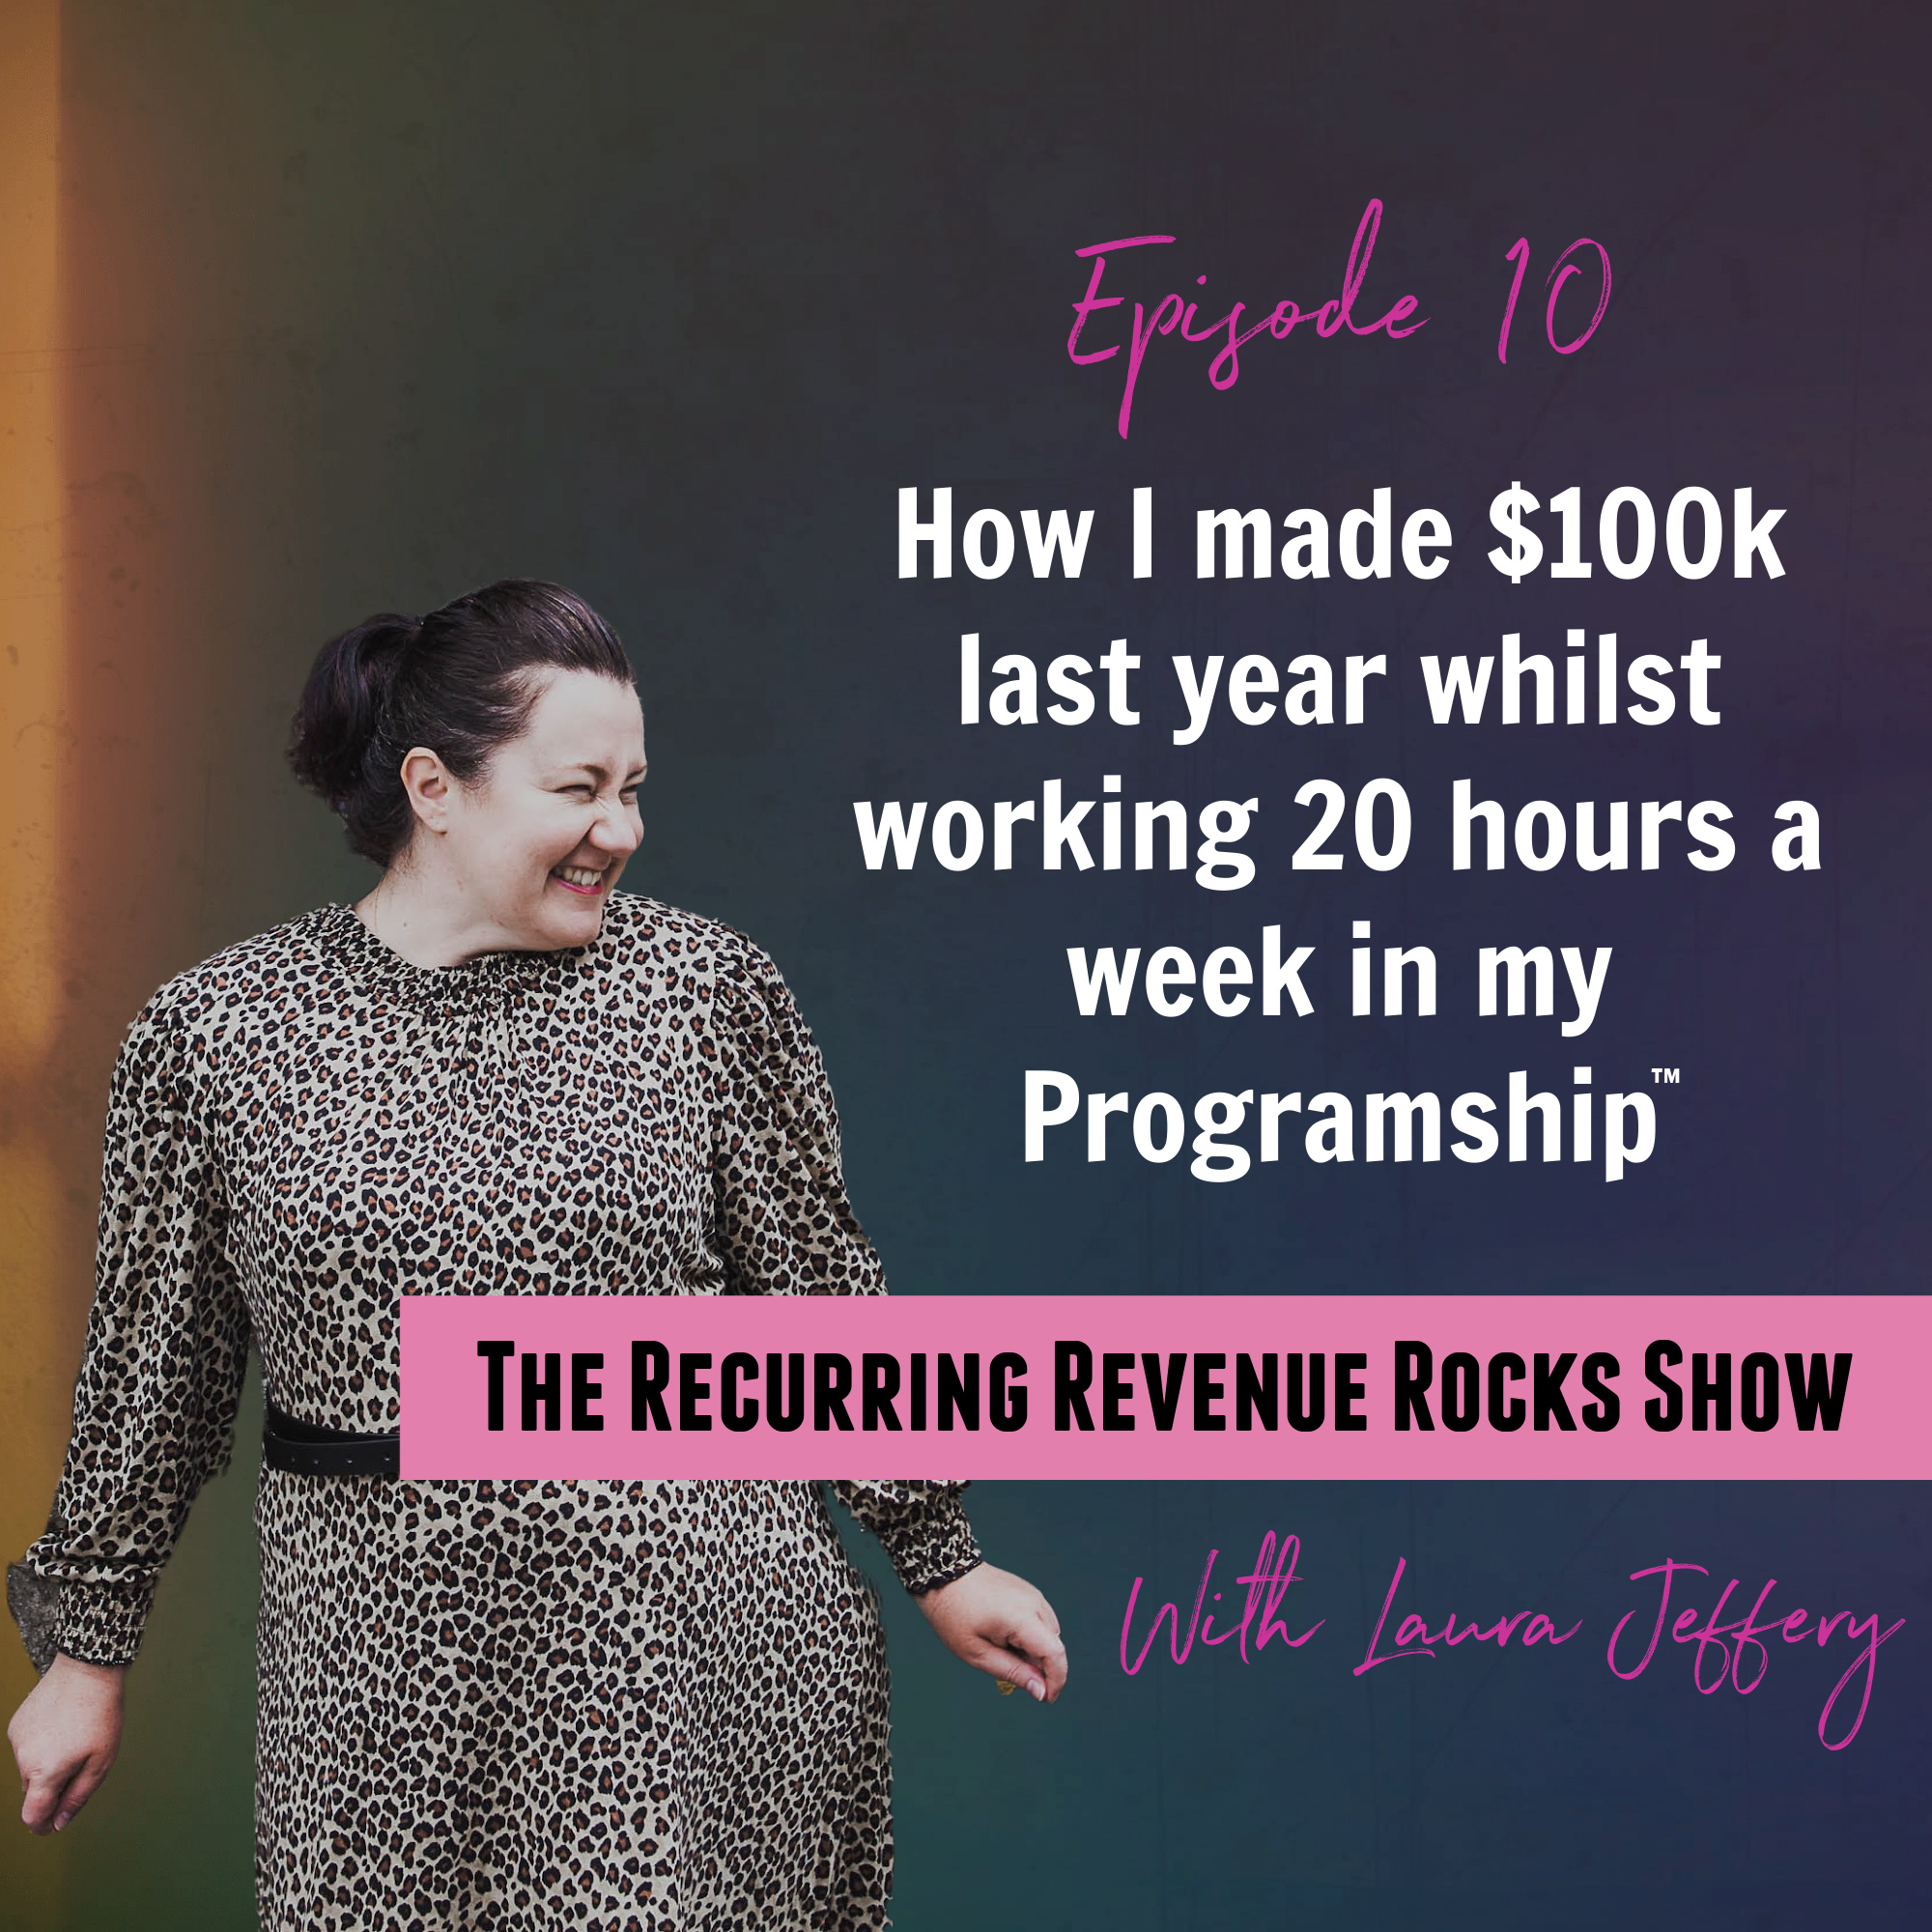 How I added $100k to my Coaching Business in 12 months, working 20 hour weeks or less